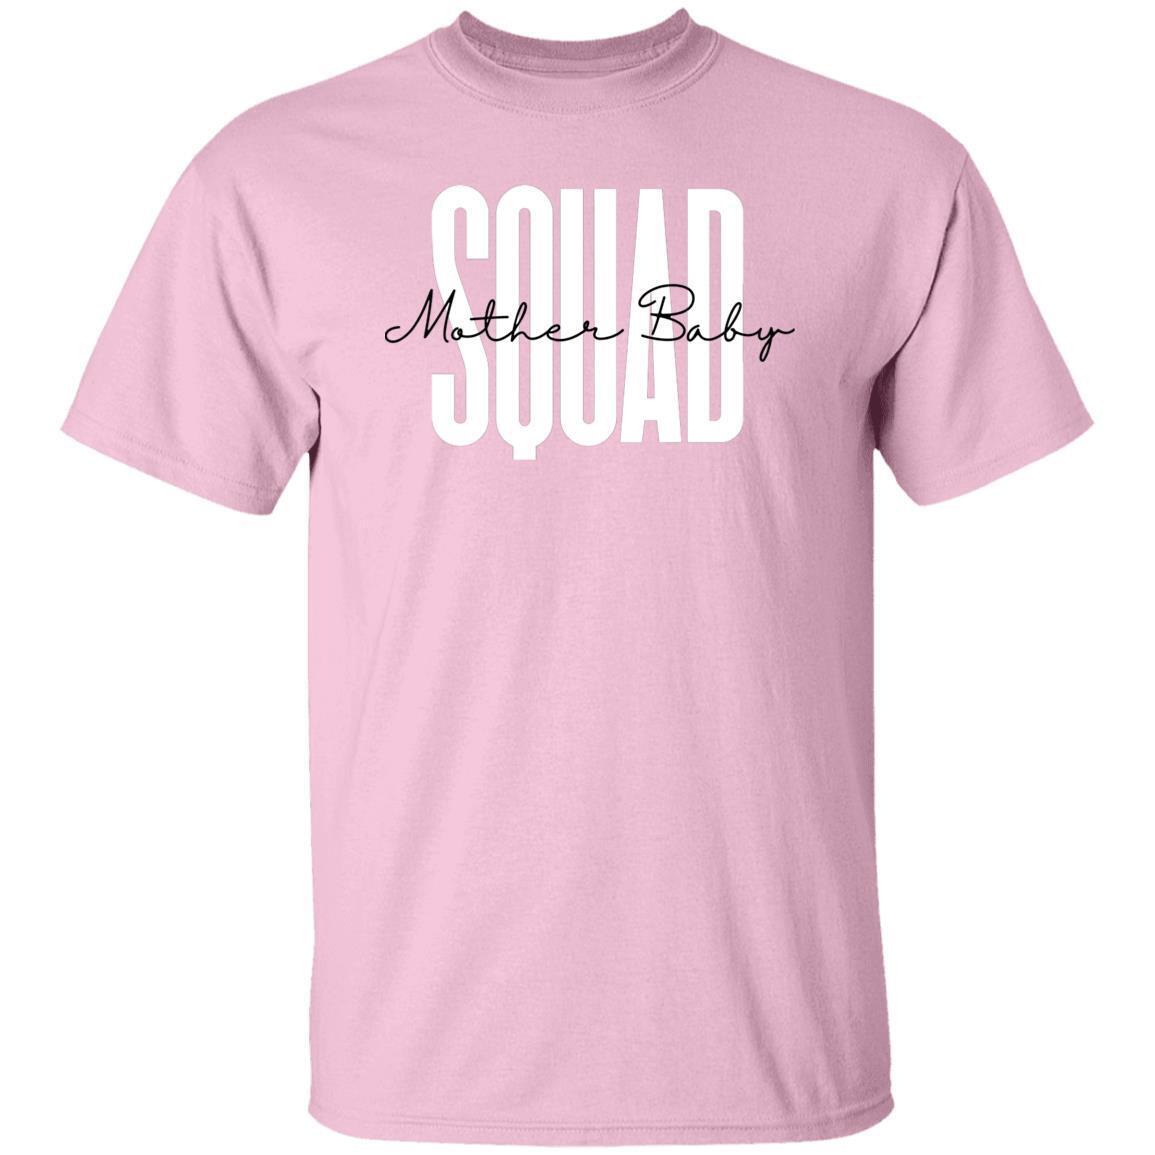 Mother Baby squad T-Shirt gift Mother Baby Nurse Unisex Tee Sand Pink ...